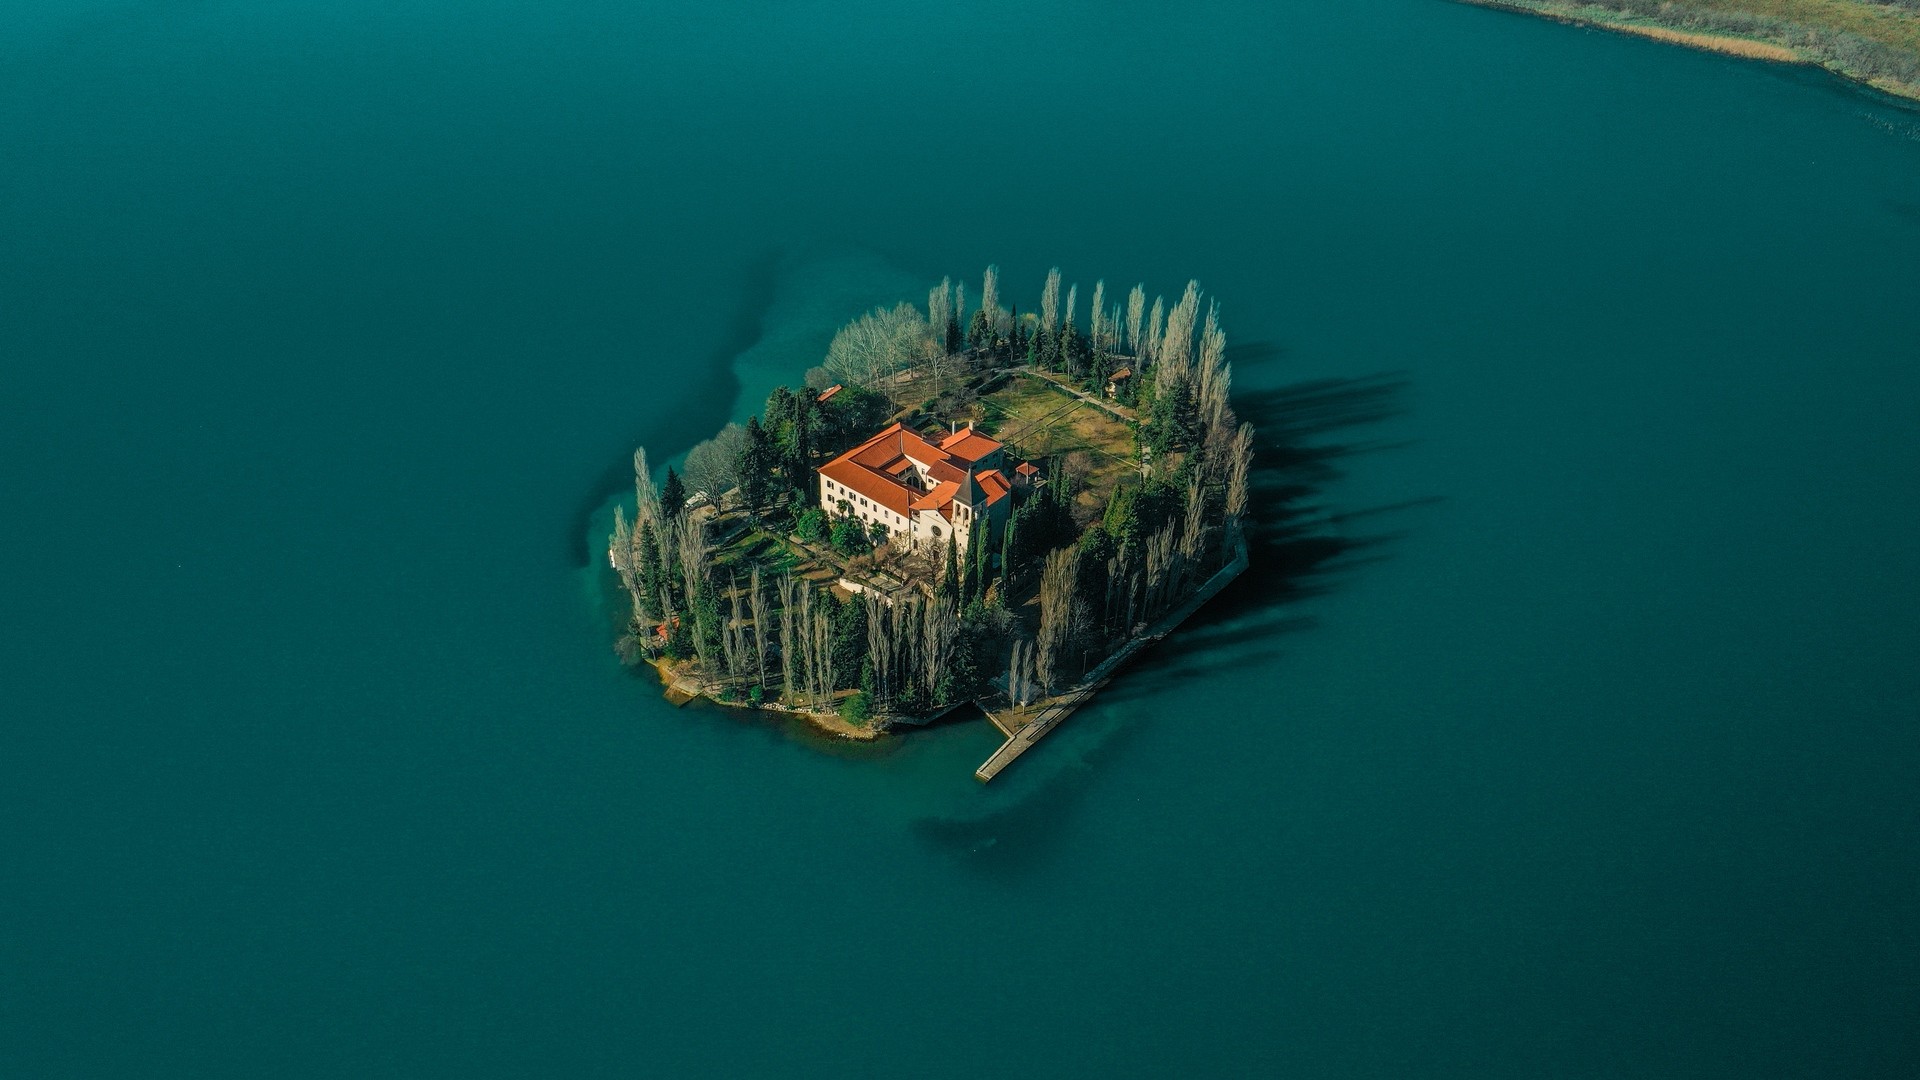 Lake, island, top view, trees, the house | picture, photo, desktop ...